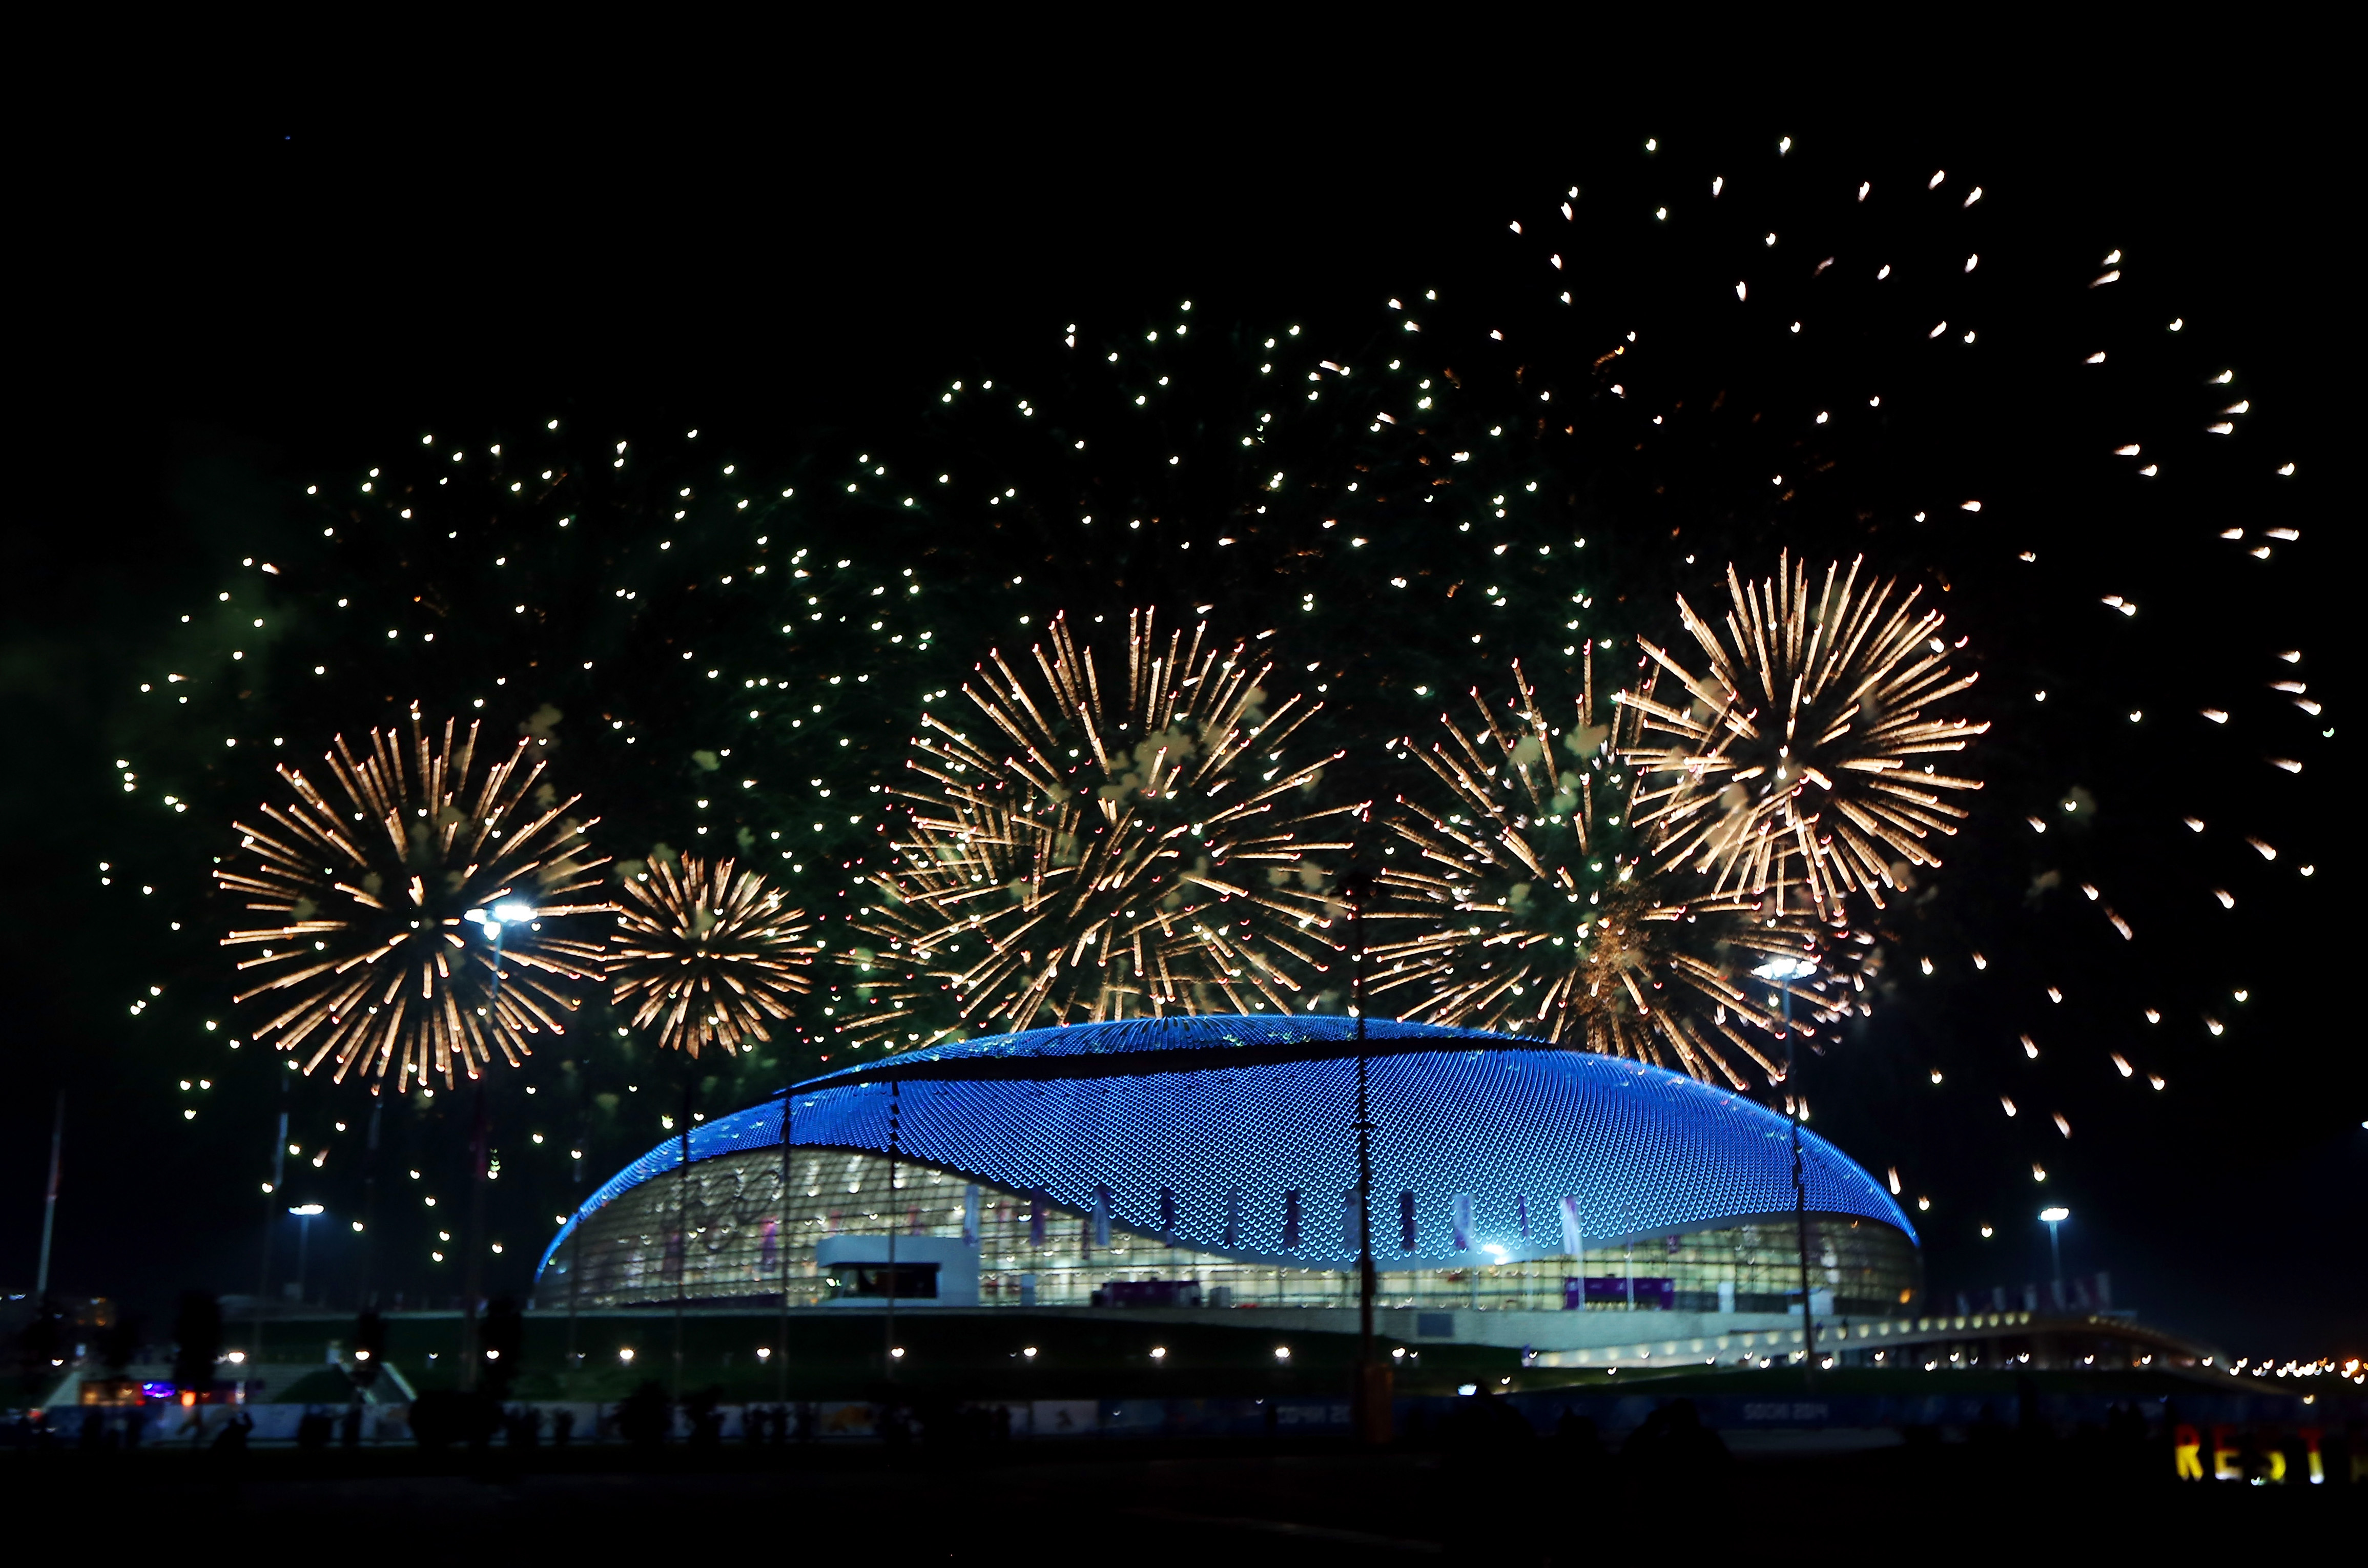 SOCHI, RUSSIA - FEBRUARY 23:Fireworks explode over the Bolshoy Ice Dome on the Olympic Park during the 2014 Sochi Winter Olympics Closing Ceremony on February 23, 2014 in Sochi, Russia. (Phot